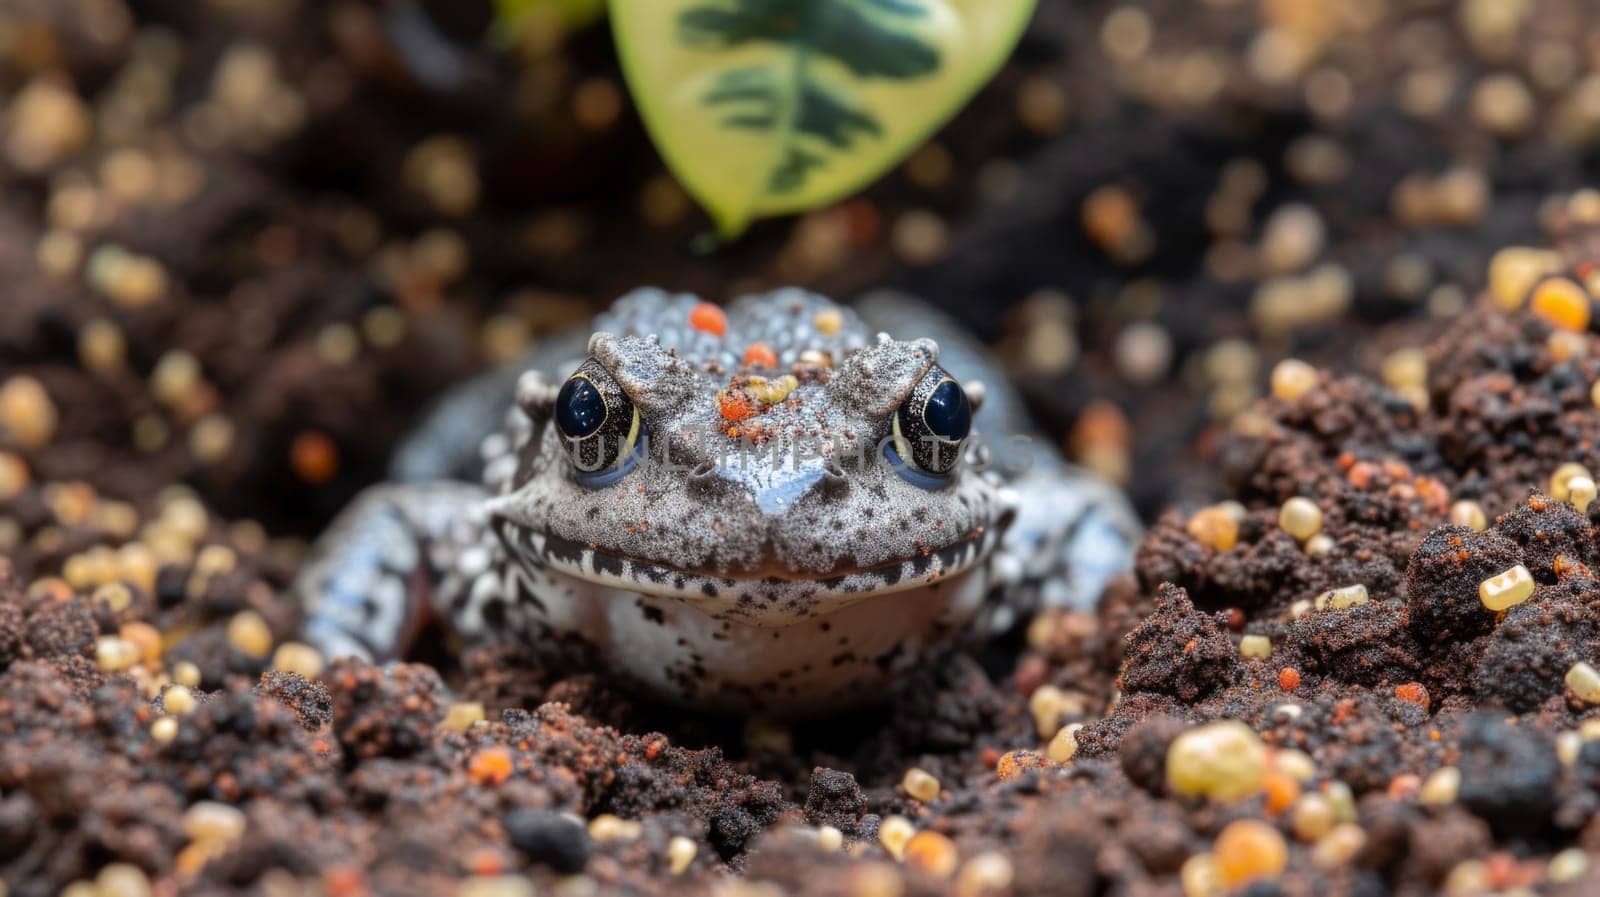 A close up of a frog sitting in the dirt with leaves